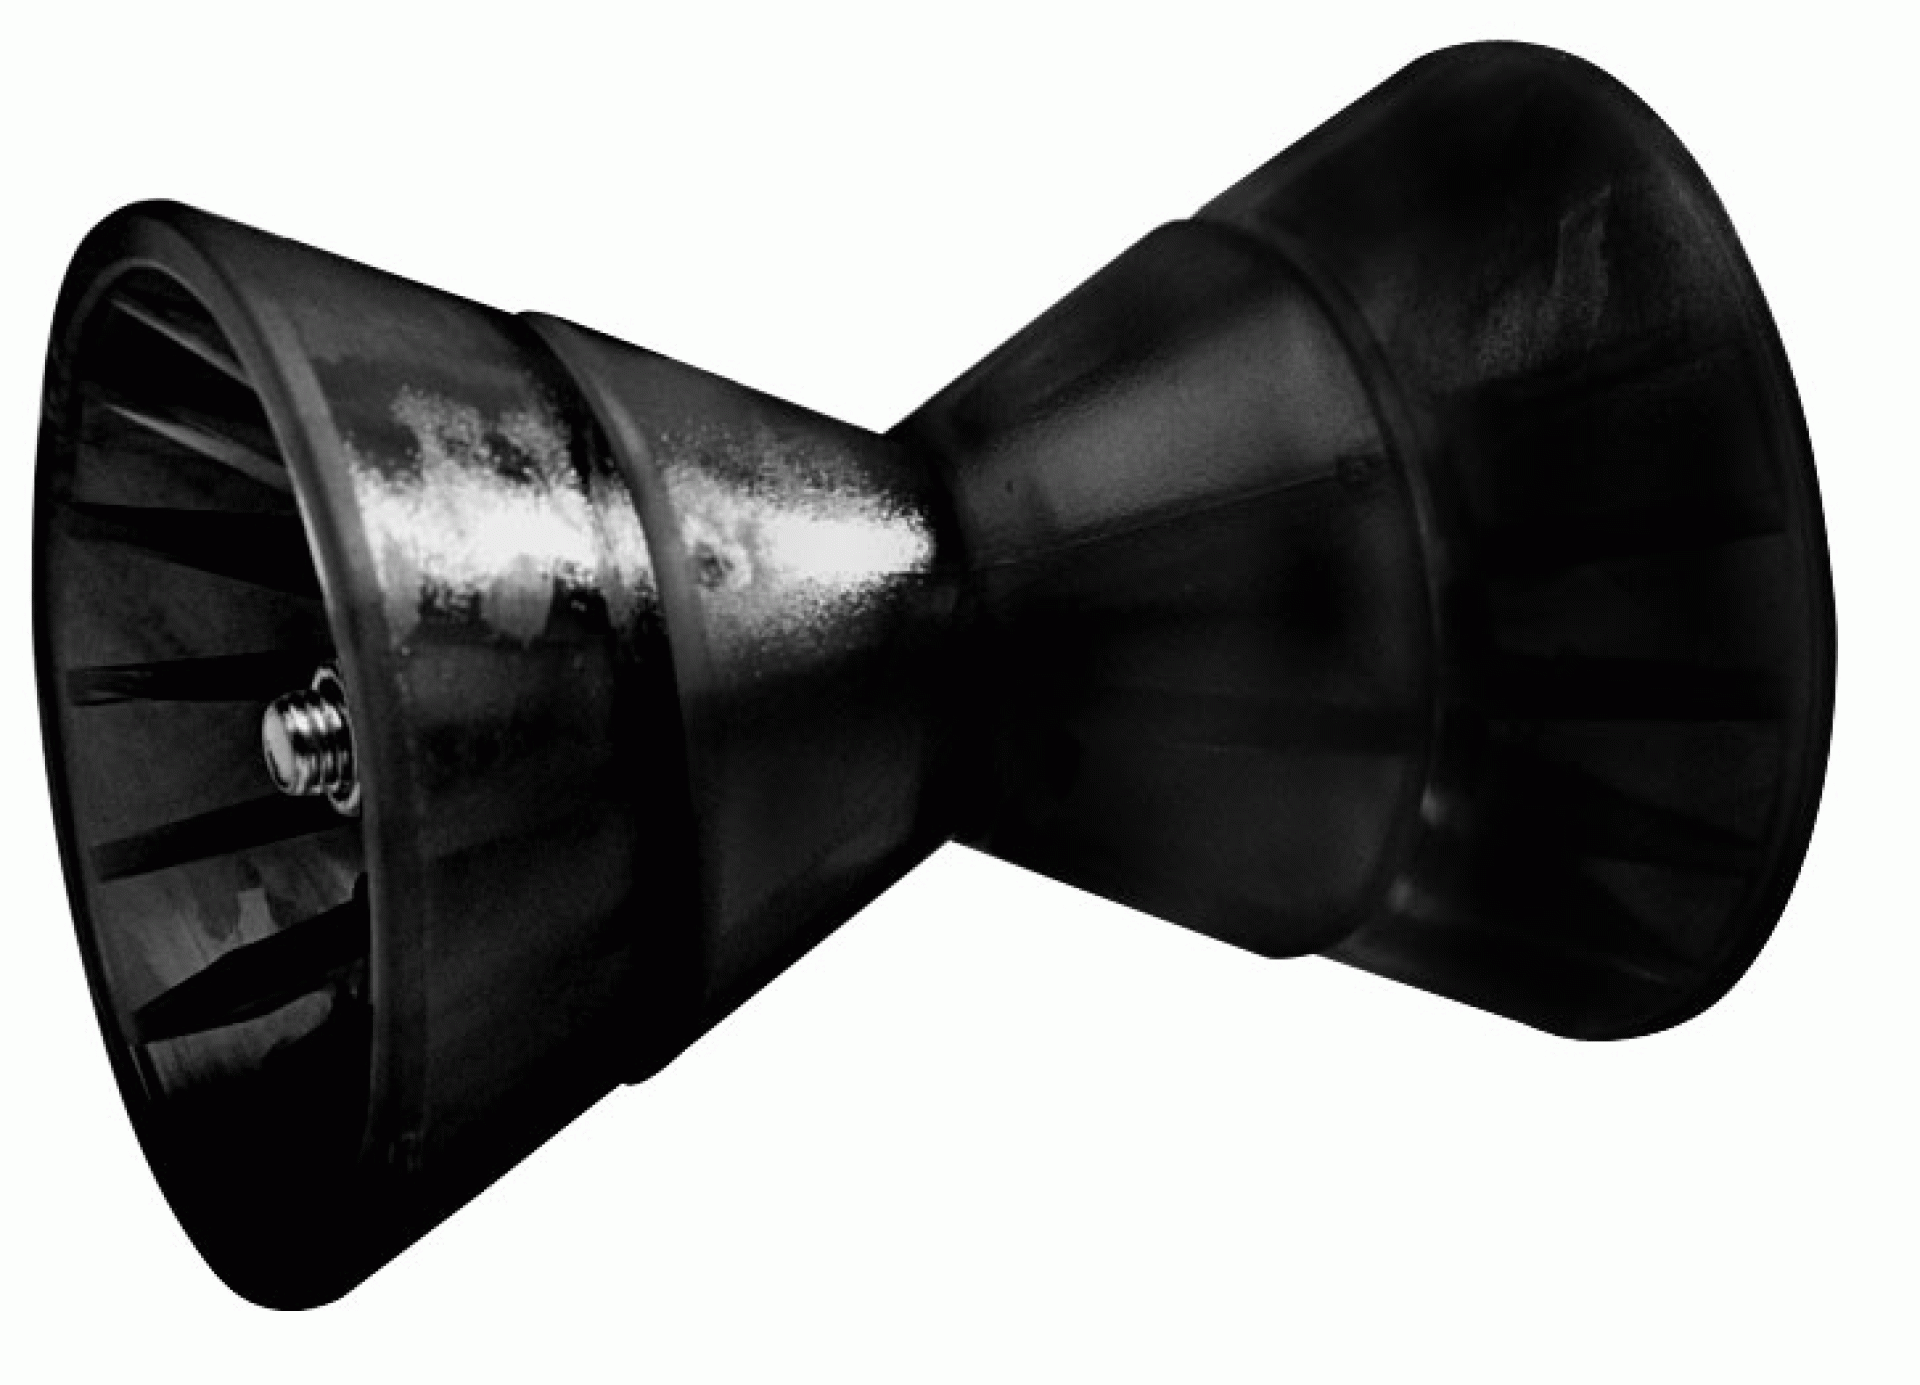 TIE DOWN ENGINEERING INC | 86404 | ROLLER ASSEMBLY W/ END BELLS - 4" - BLACK